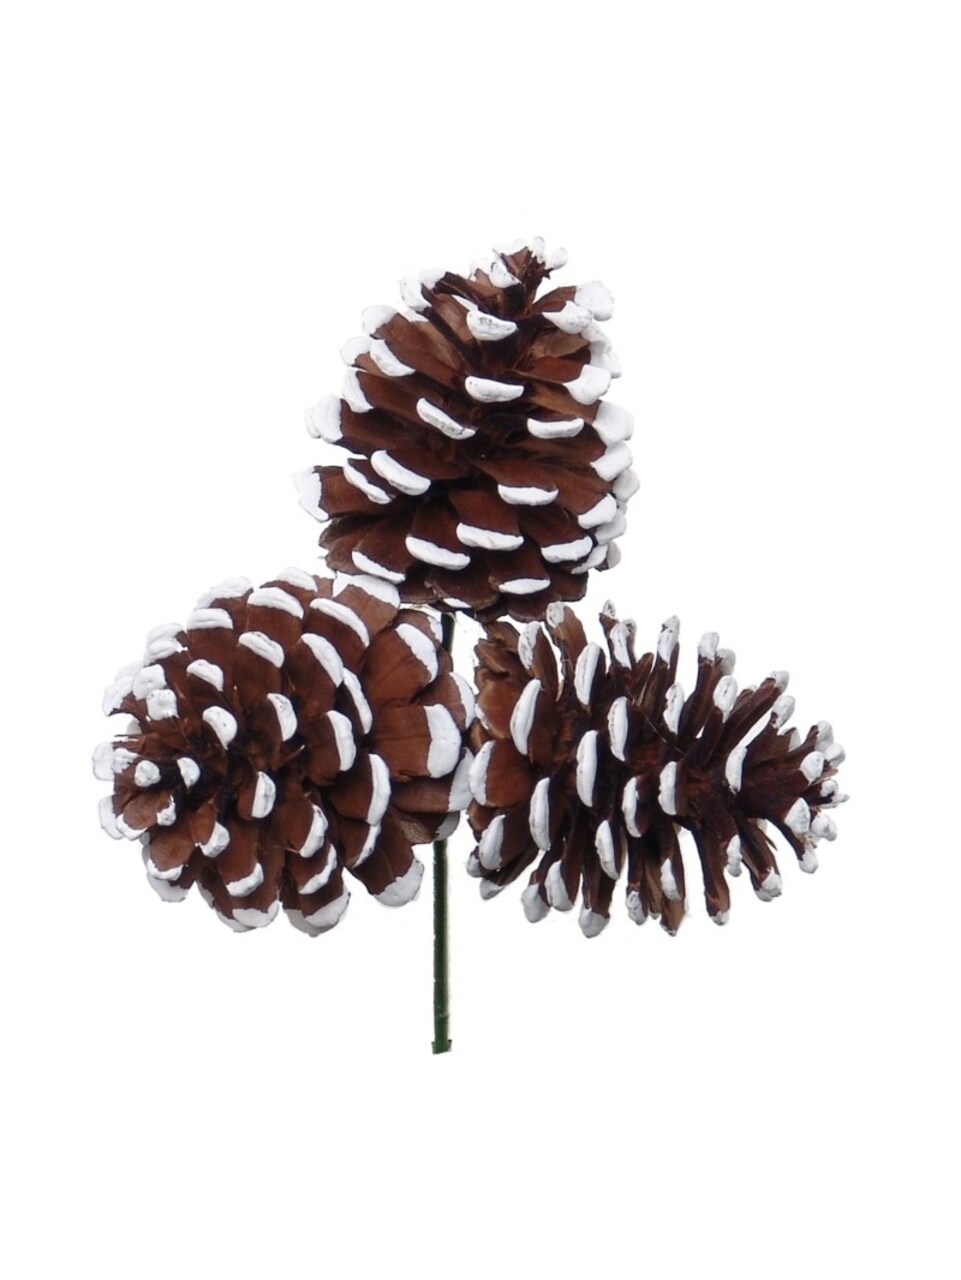 White Tipped Natural Pine Cone Picks | 2.5 Wide | Festive Holiday Decor |  Trees, Wreaths, & Garlands | Christmas Picks | Home & Office Decor (Set of